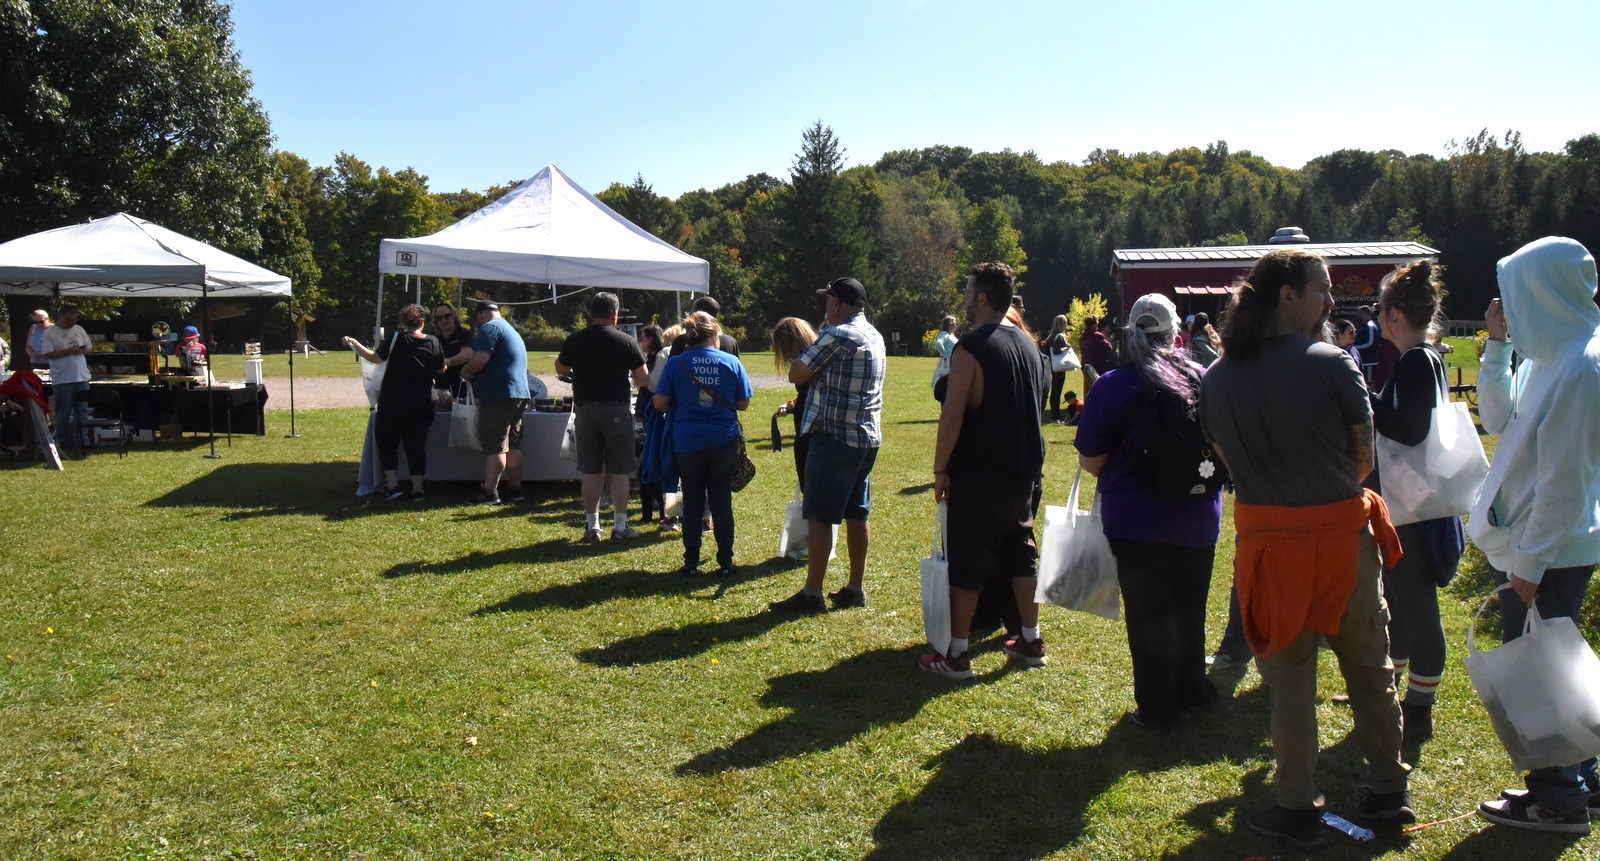 Participants lined up to get their yummy treats from Lavender Blue Catering table at Heidi's Walk for Hope September 2023.